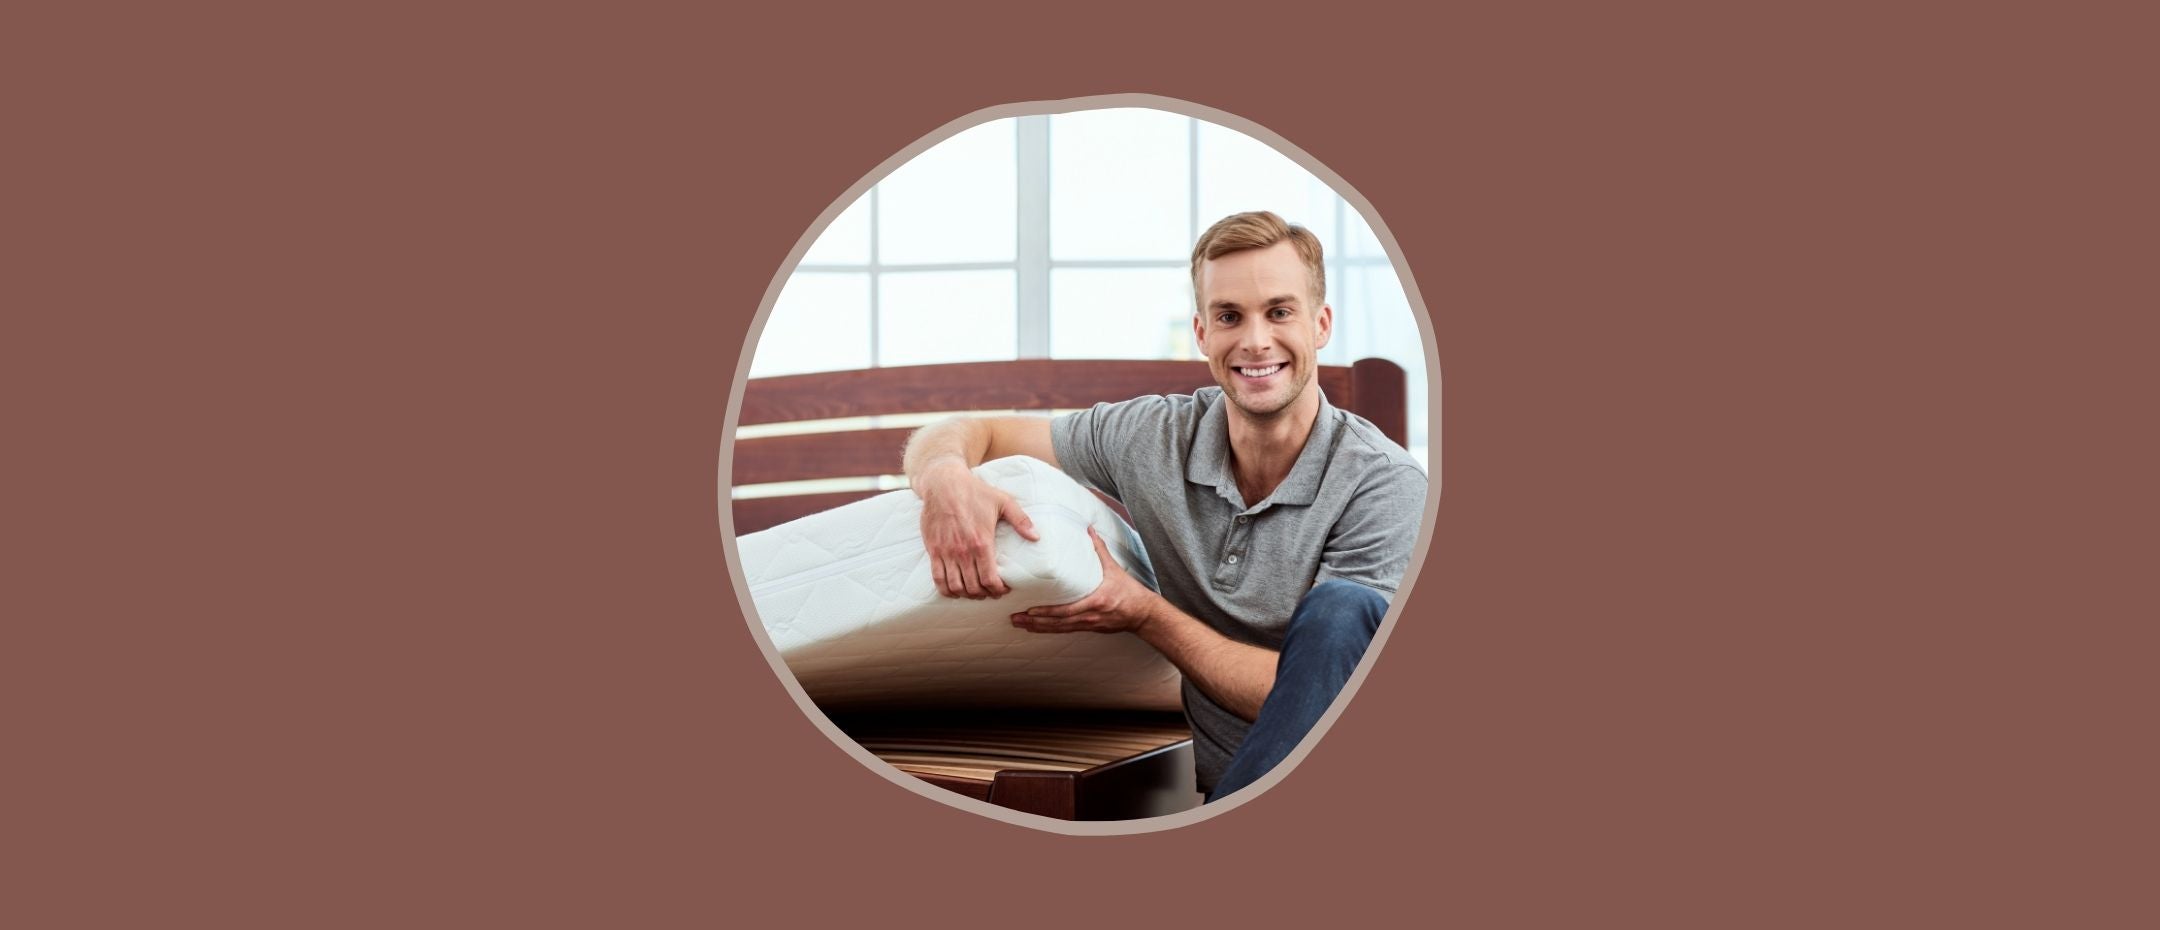 Happy man lifting the corner of a mattress to be moved